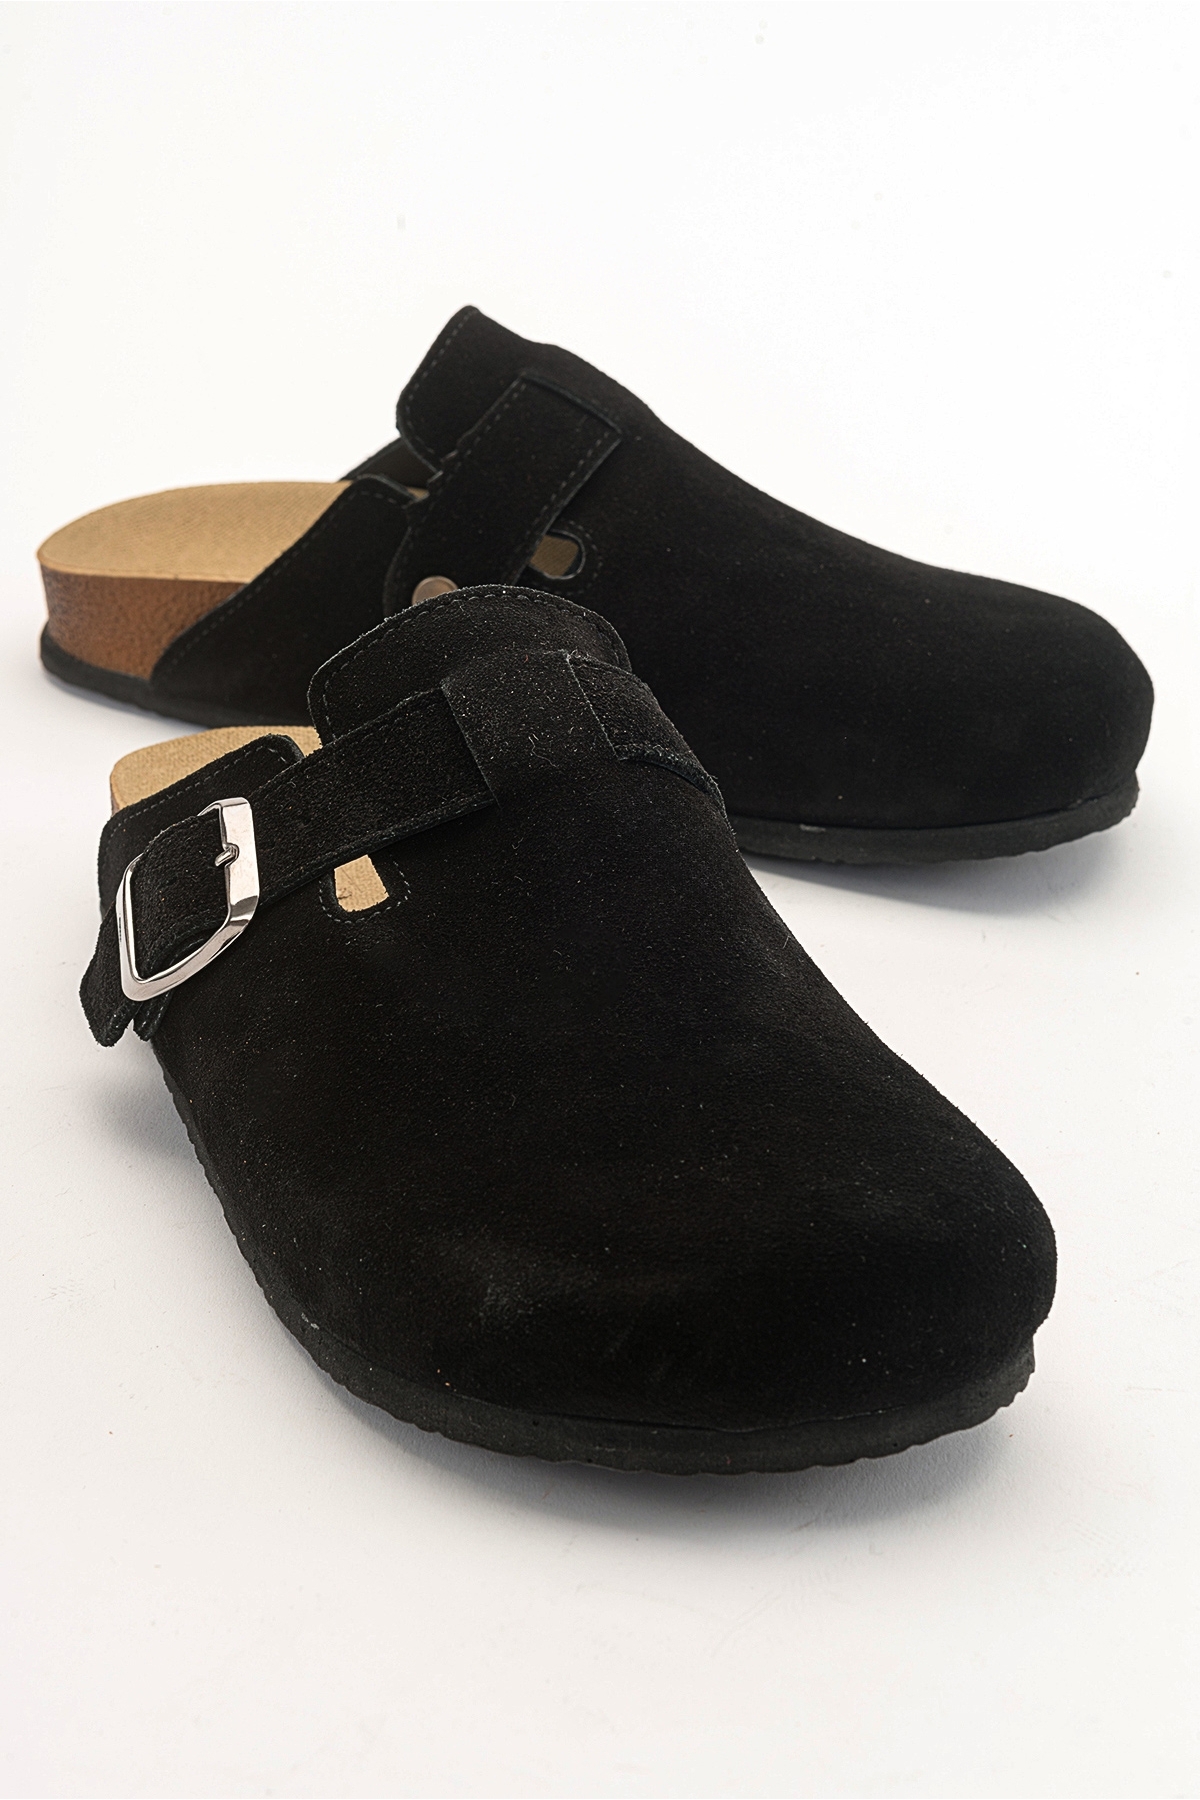 Levně LuviShoes GONS Black Suede Leather Women's Slippers